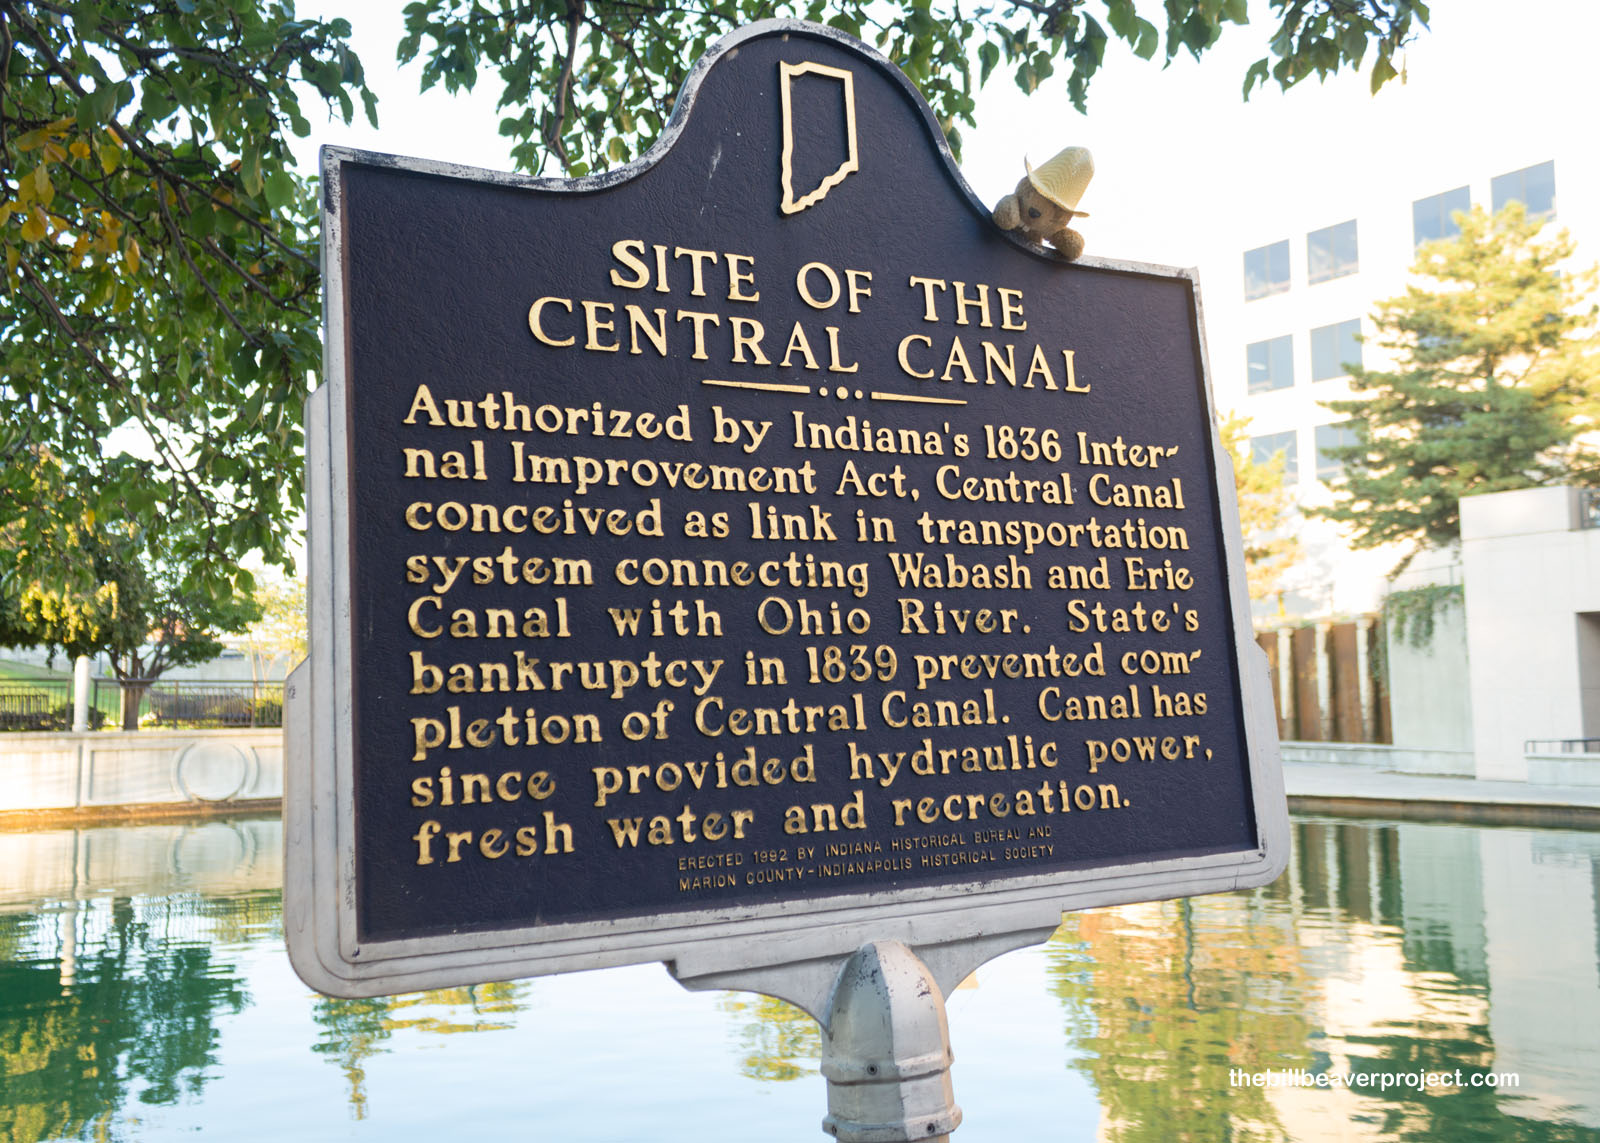 Site of the Central Canal